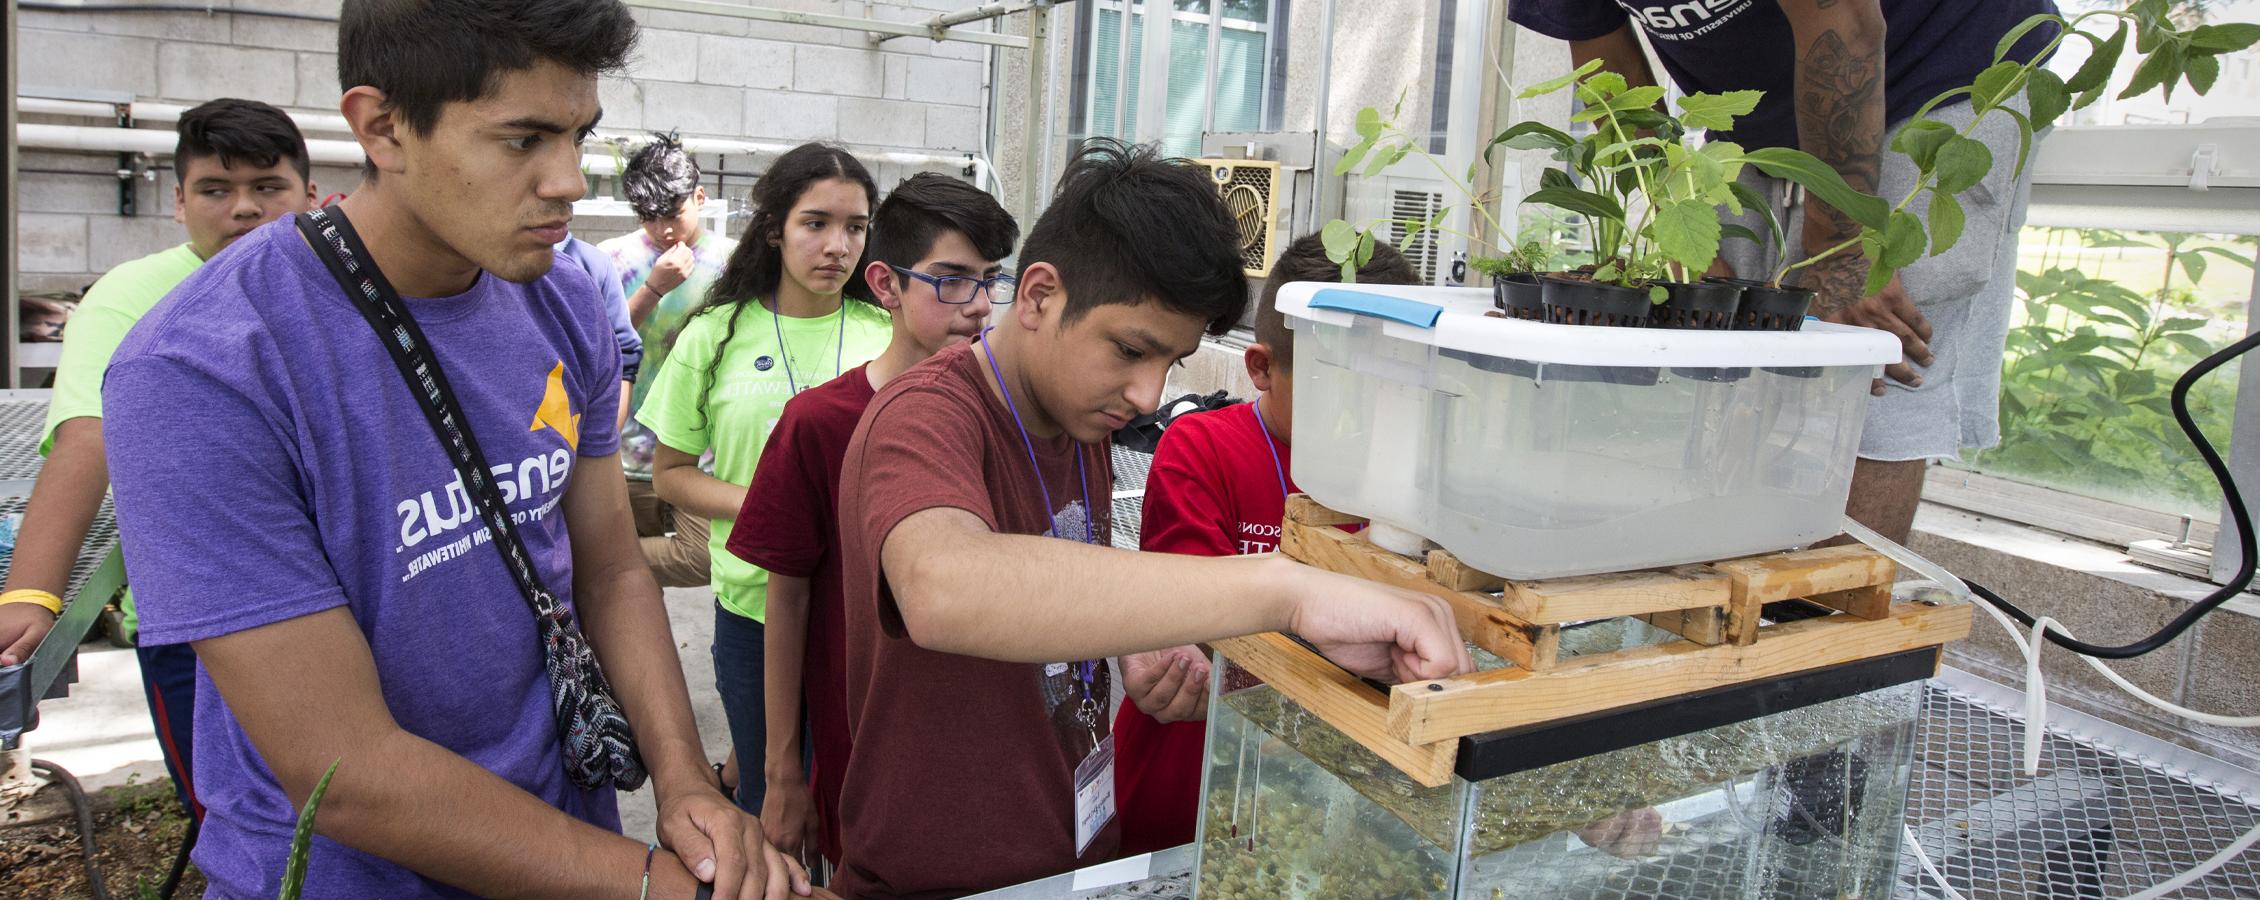 Students look at a system that is growing food using hydroponics.